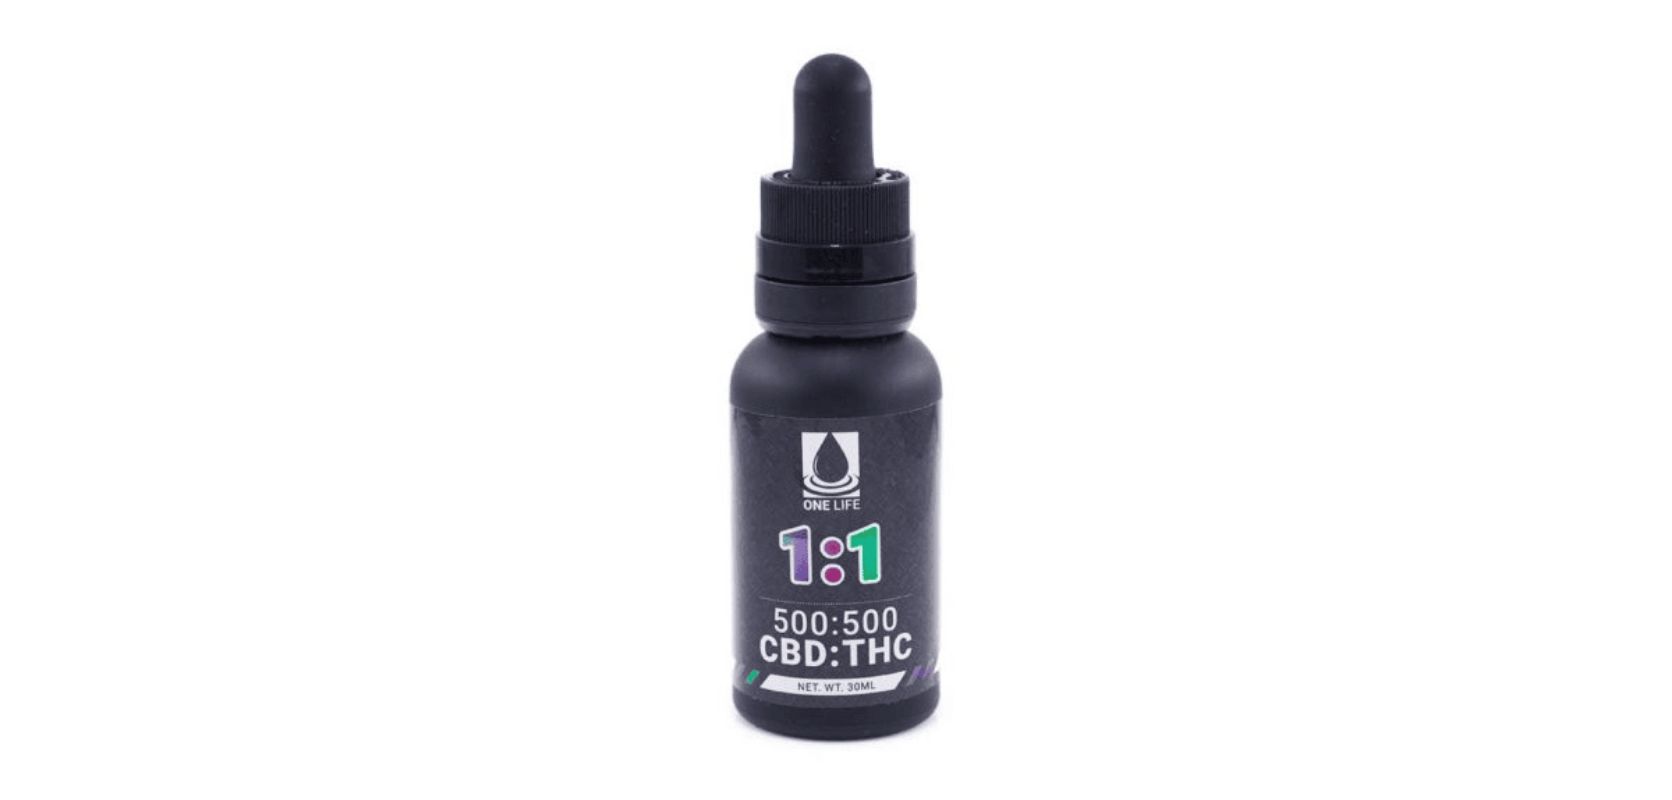 When you buy distillate online in Canada, try the 1:1 CBD/THC One Life Tincture for a balanced effect.